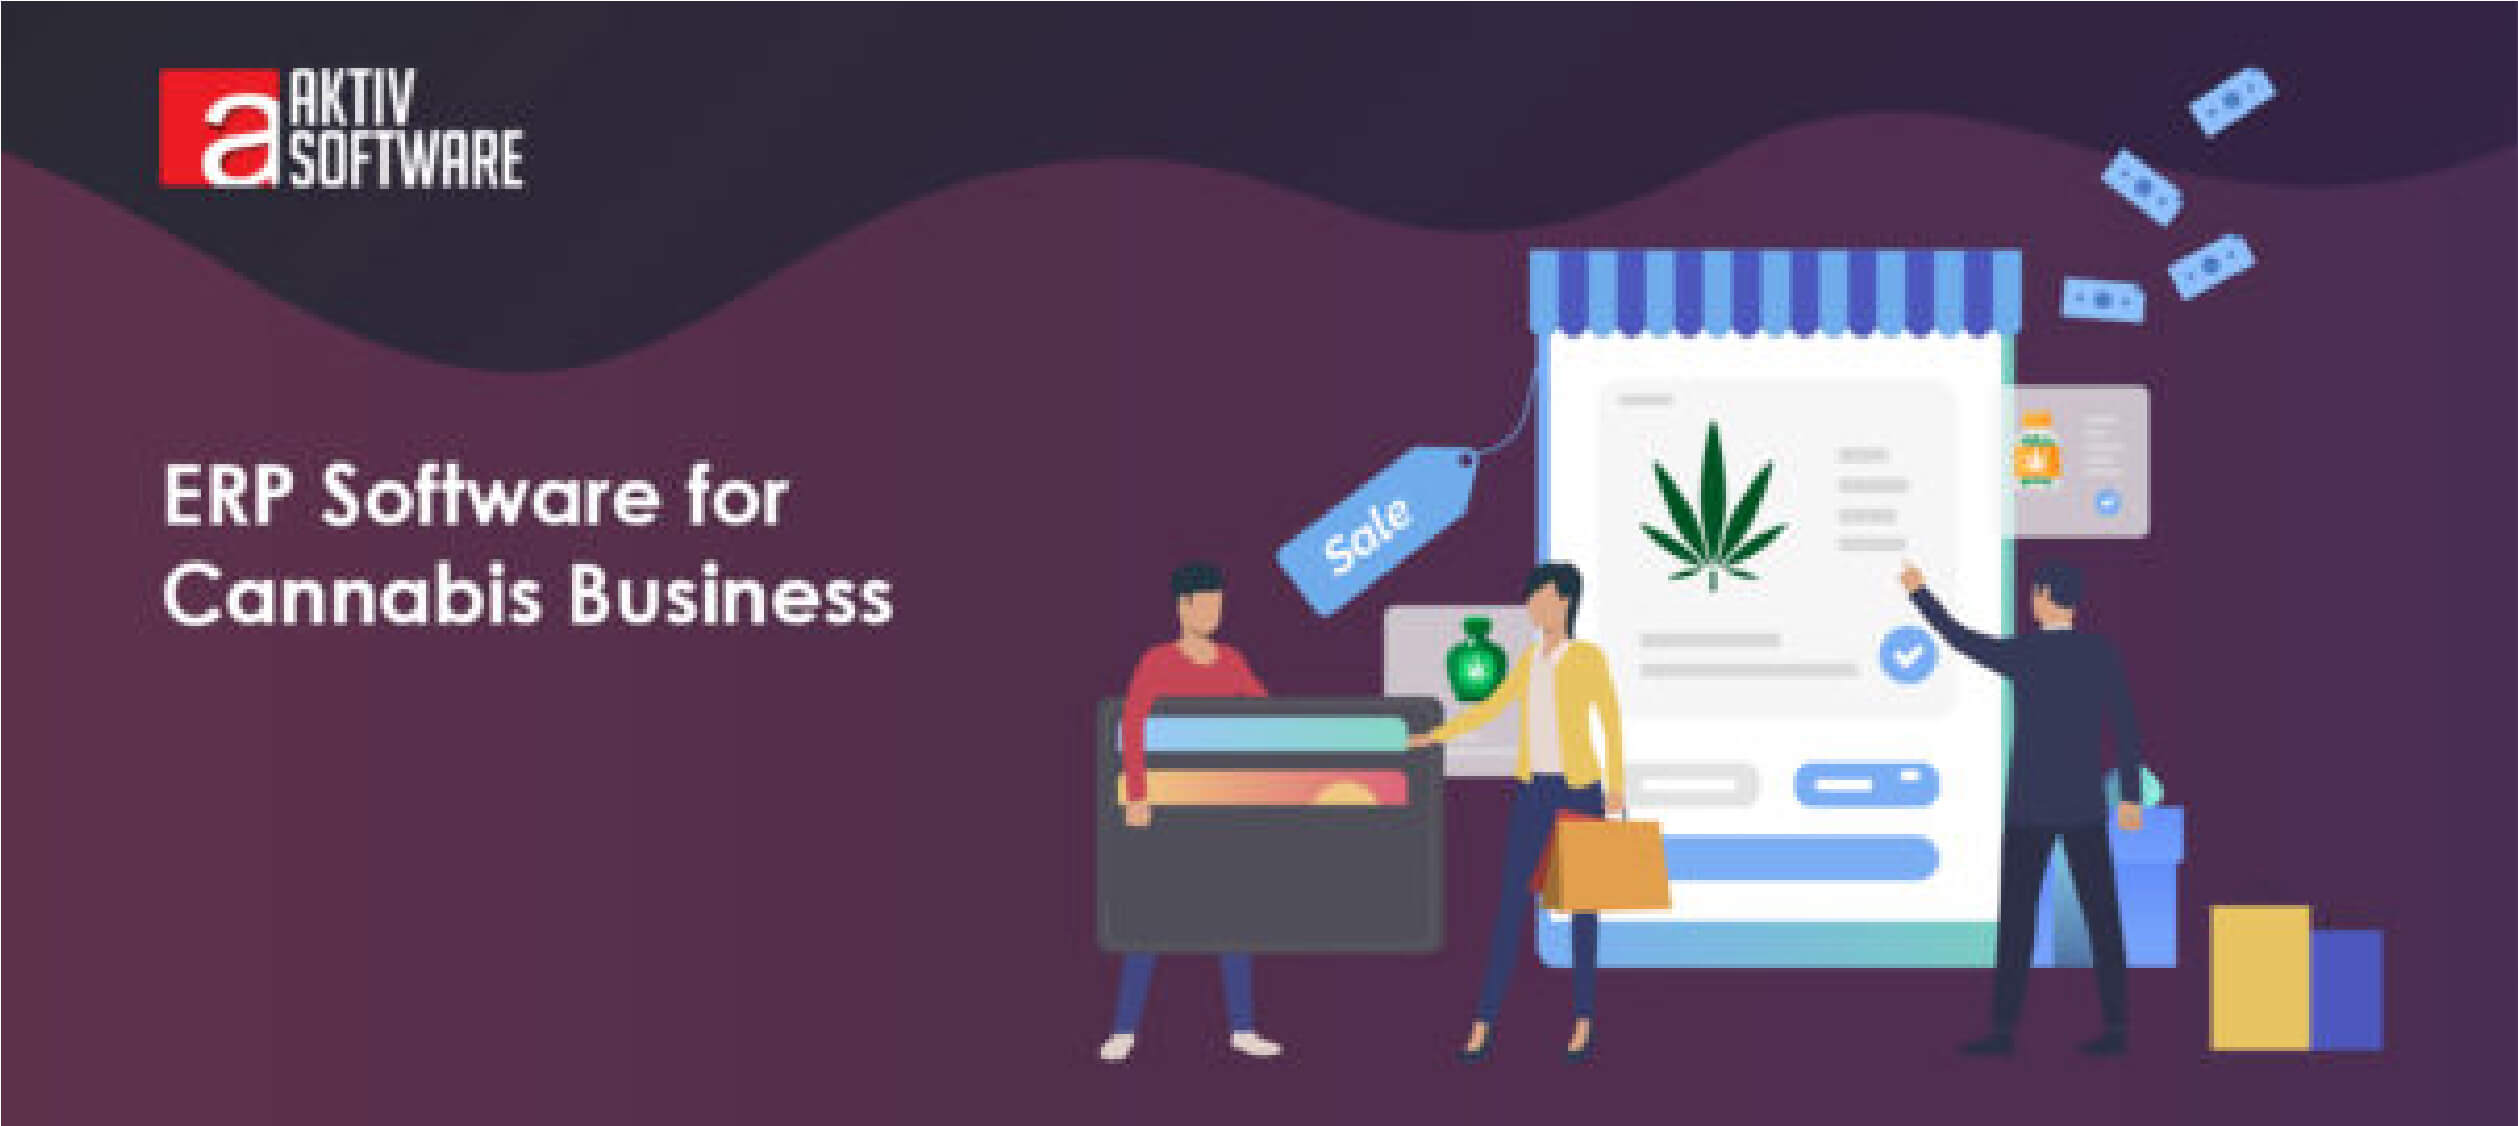 ERP Software for Cannabis